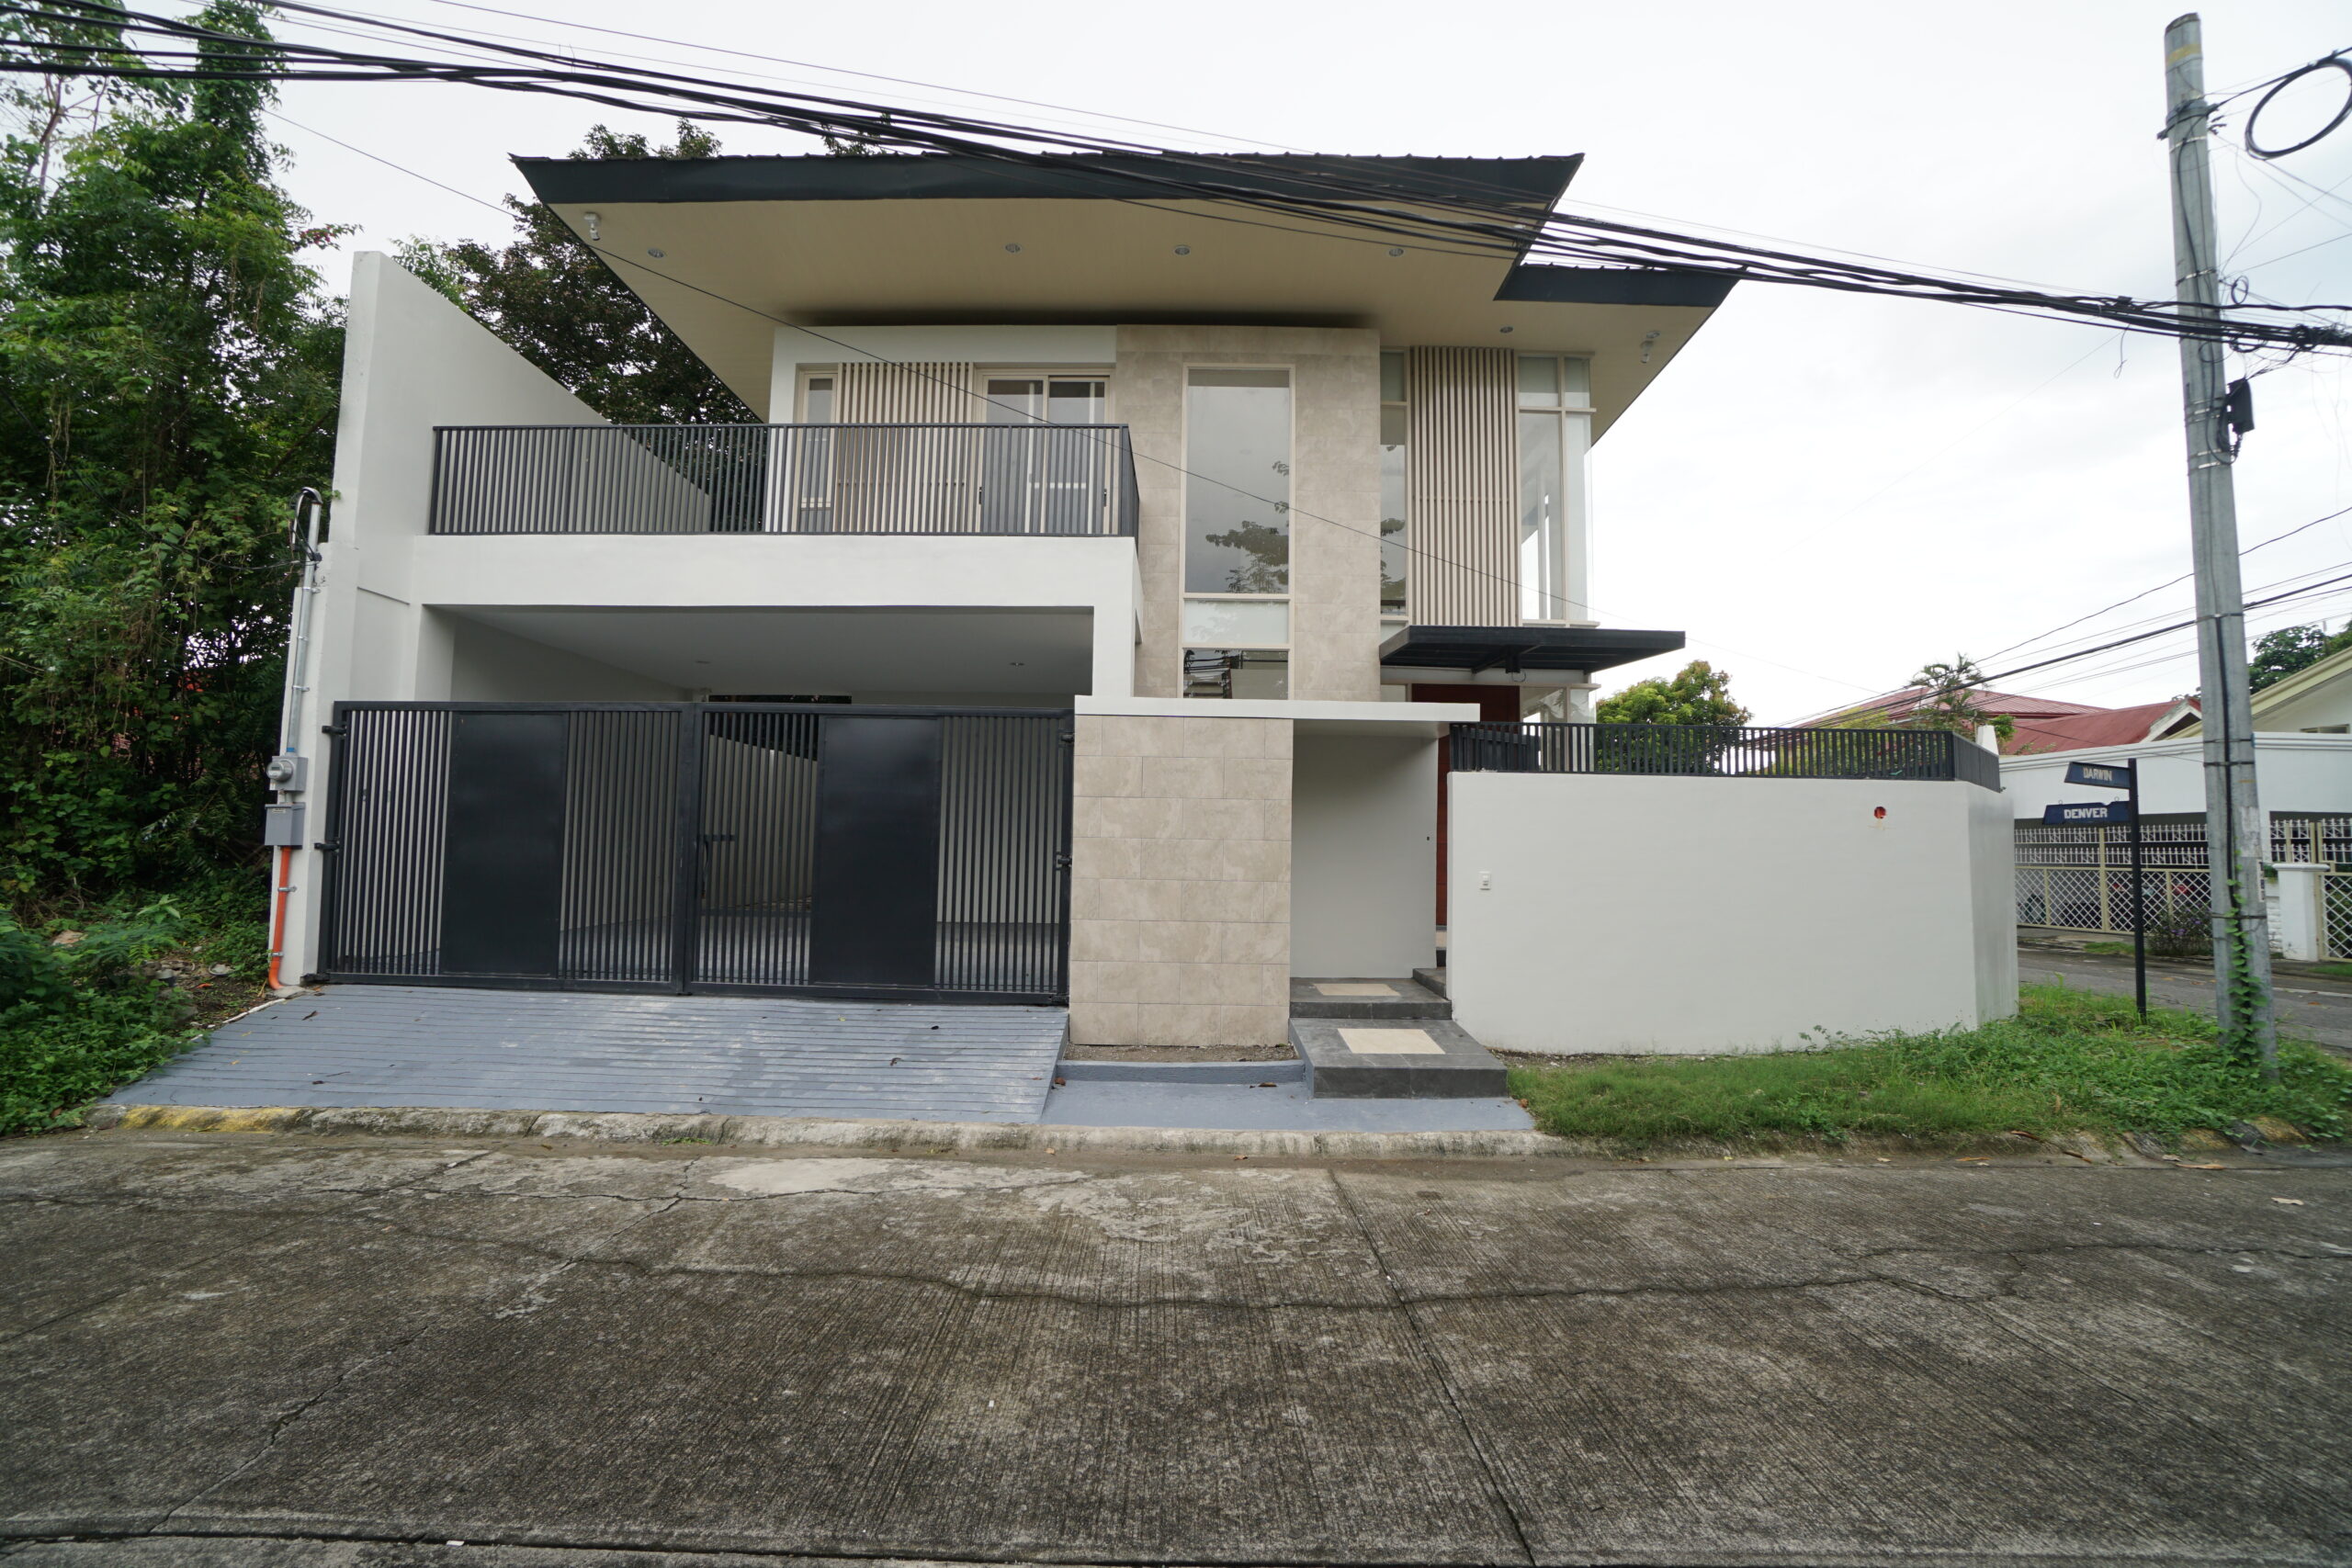 FOR SALE New Modern 2 Storey House in BF HOMES, Paranaque City